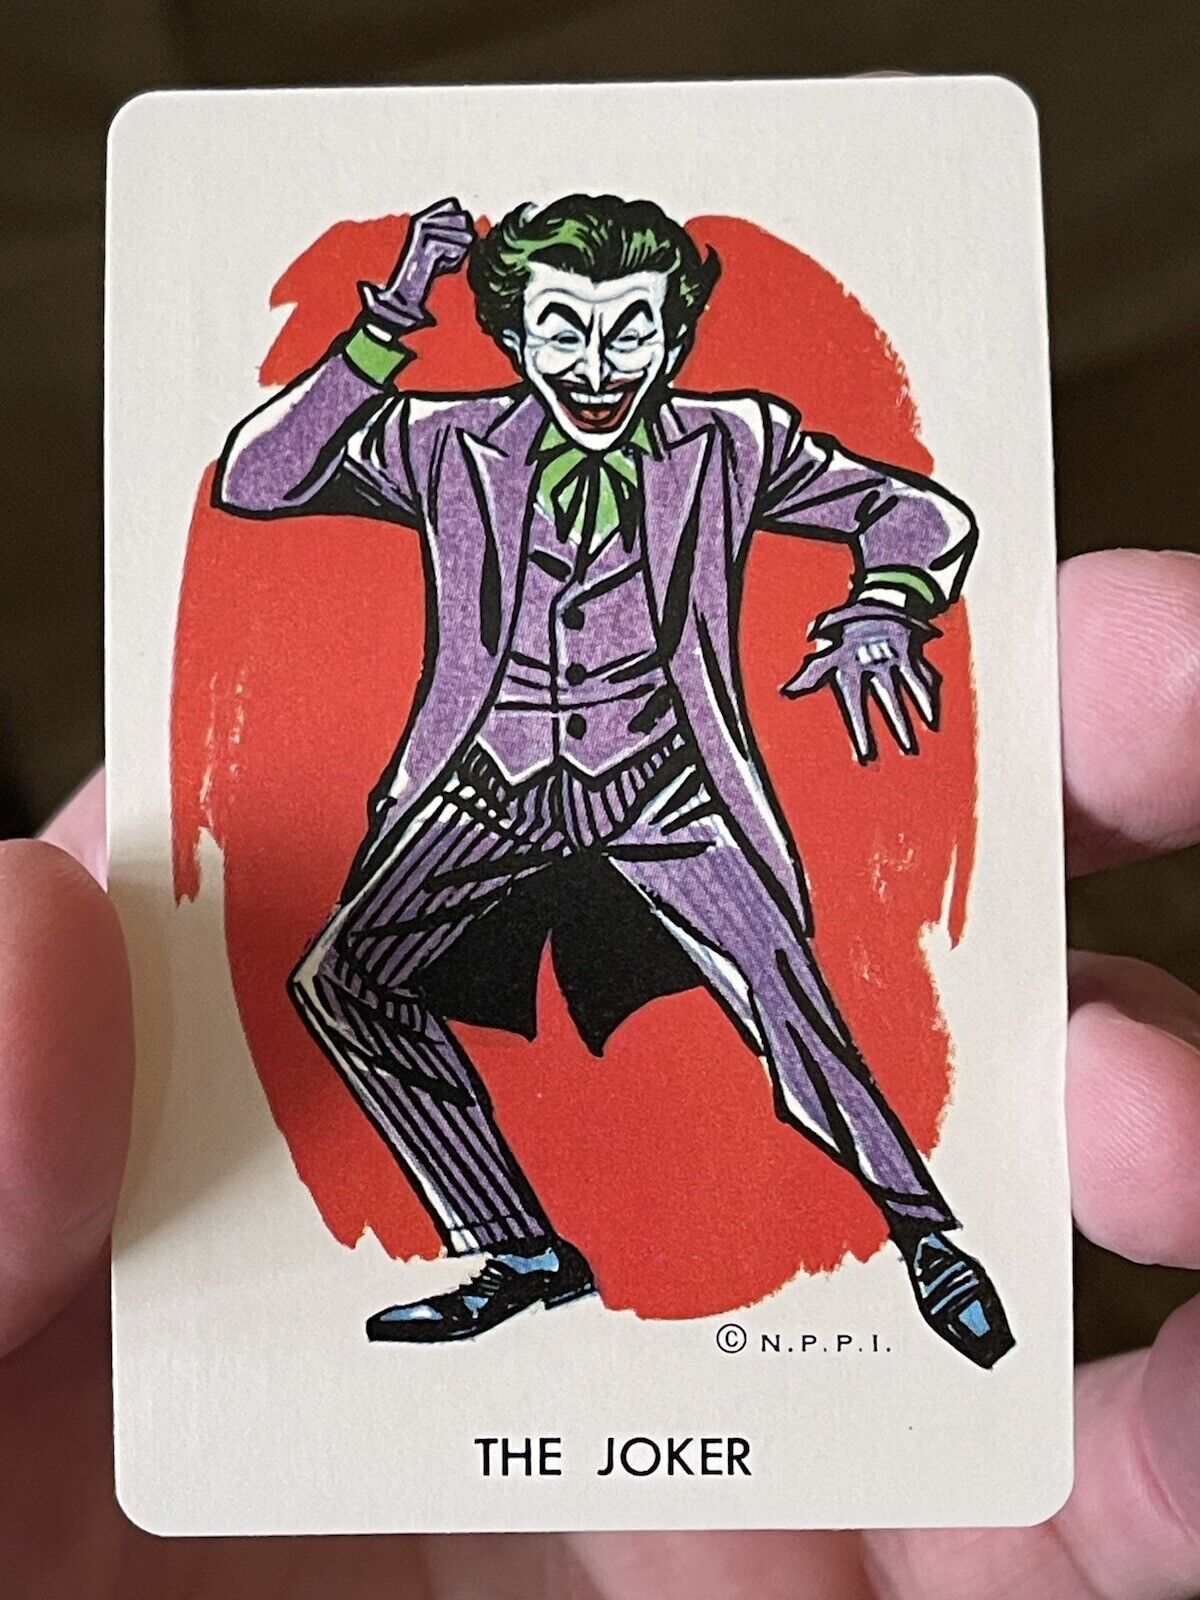 EXTREMELY RARE VINTAGE 1966 BATMAN THE JOKER ROOKIE YEAR PLAYING CARD GAME